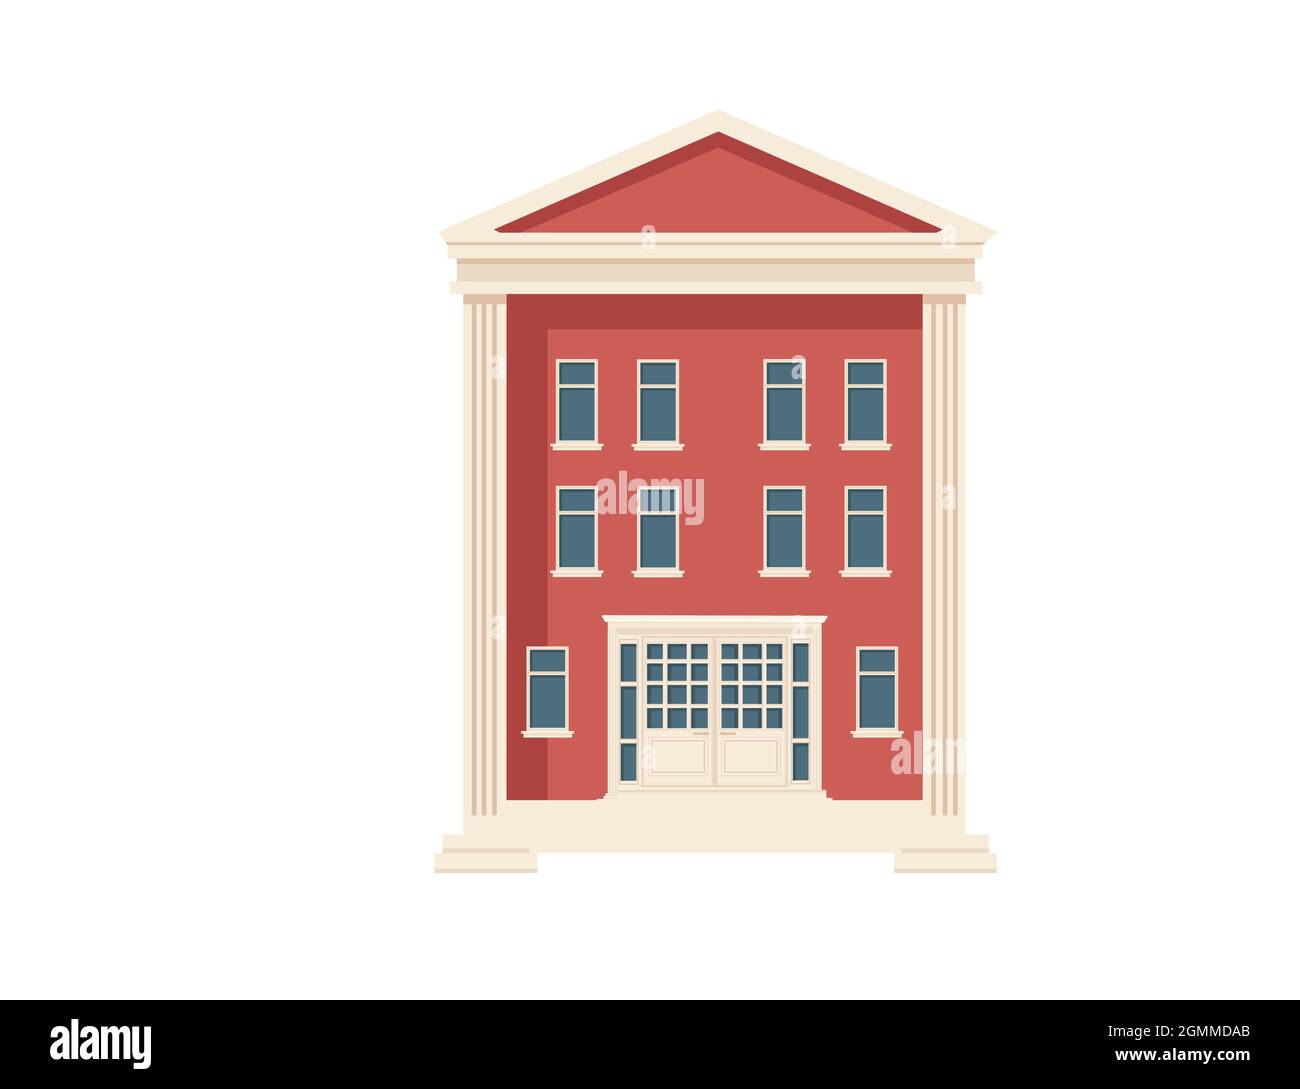 Red color classic USA architecture government building vector illustration on white background Stock Vector